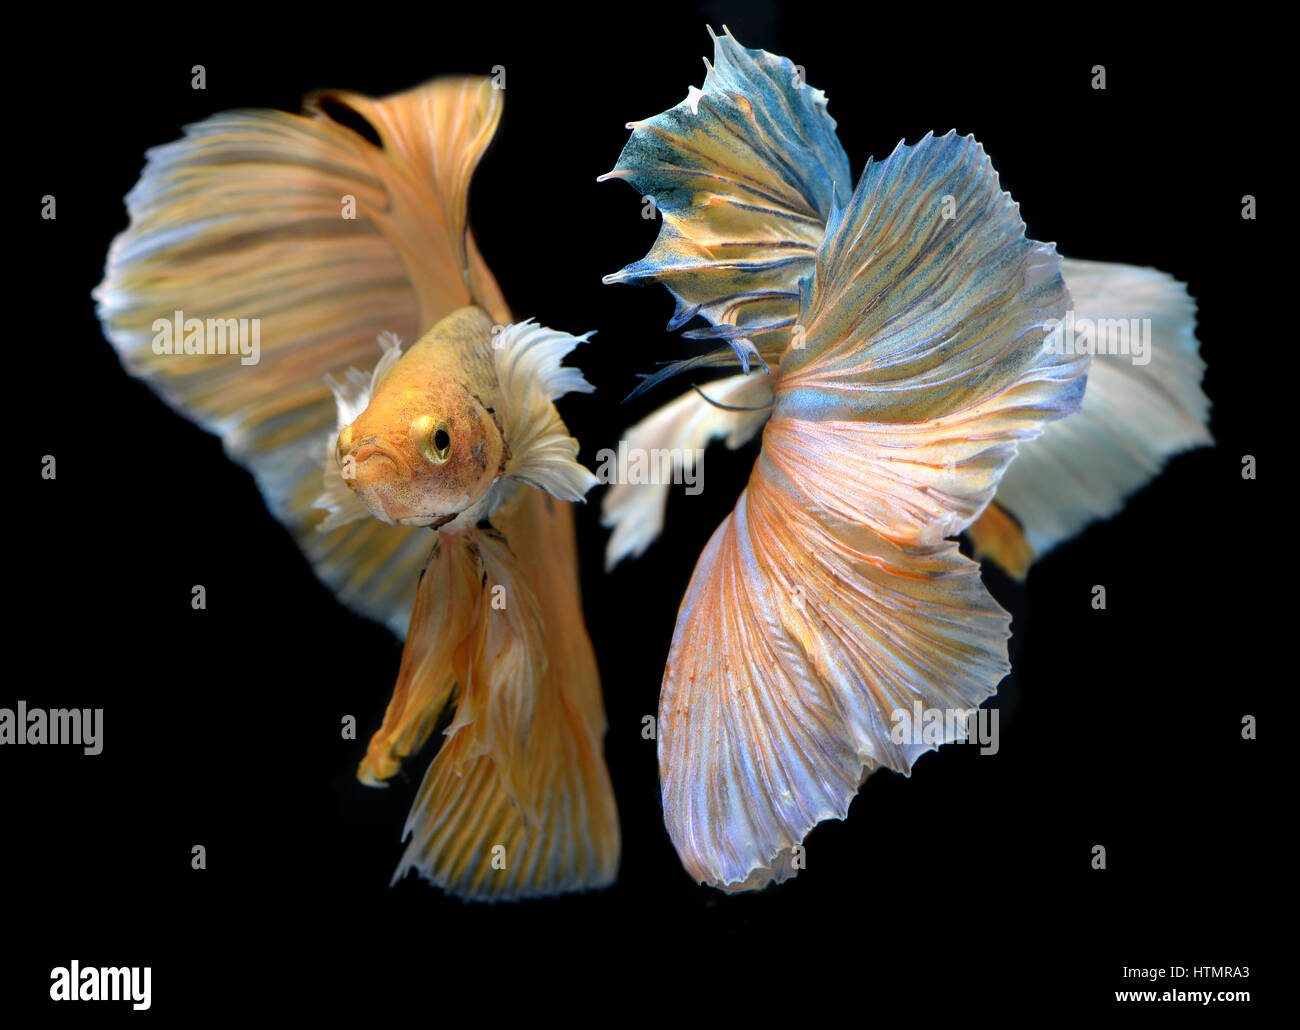 Golden red Colorful  waver of Betta Saimese fighting fish  beauty and freedom in black background photo with studio flash lighting. Stock Photo